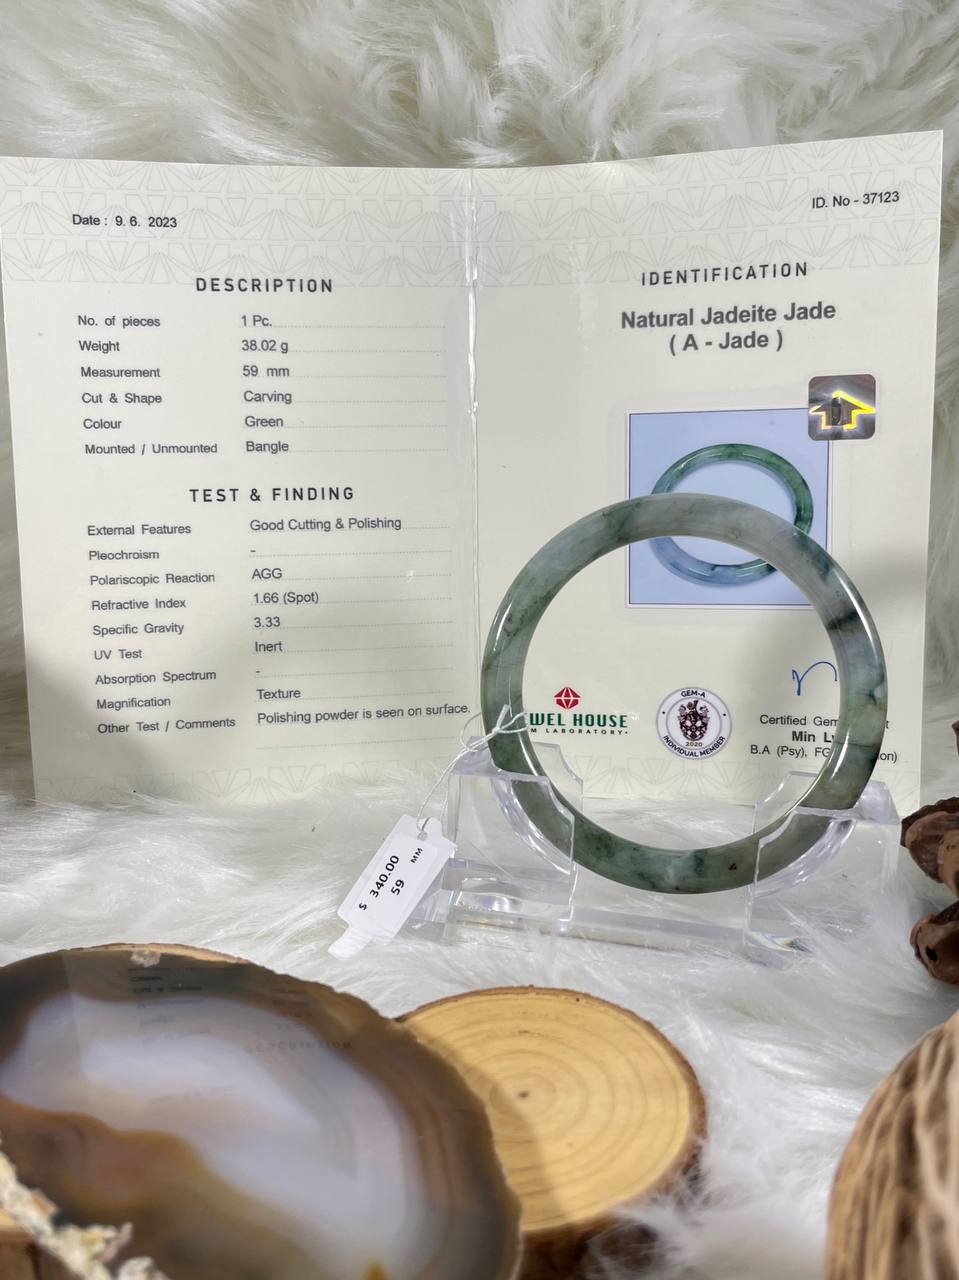 Grade A Natural Jade Bangle with certificate #37123